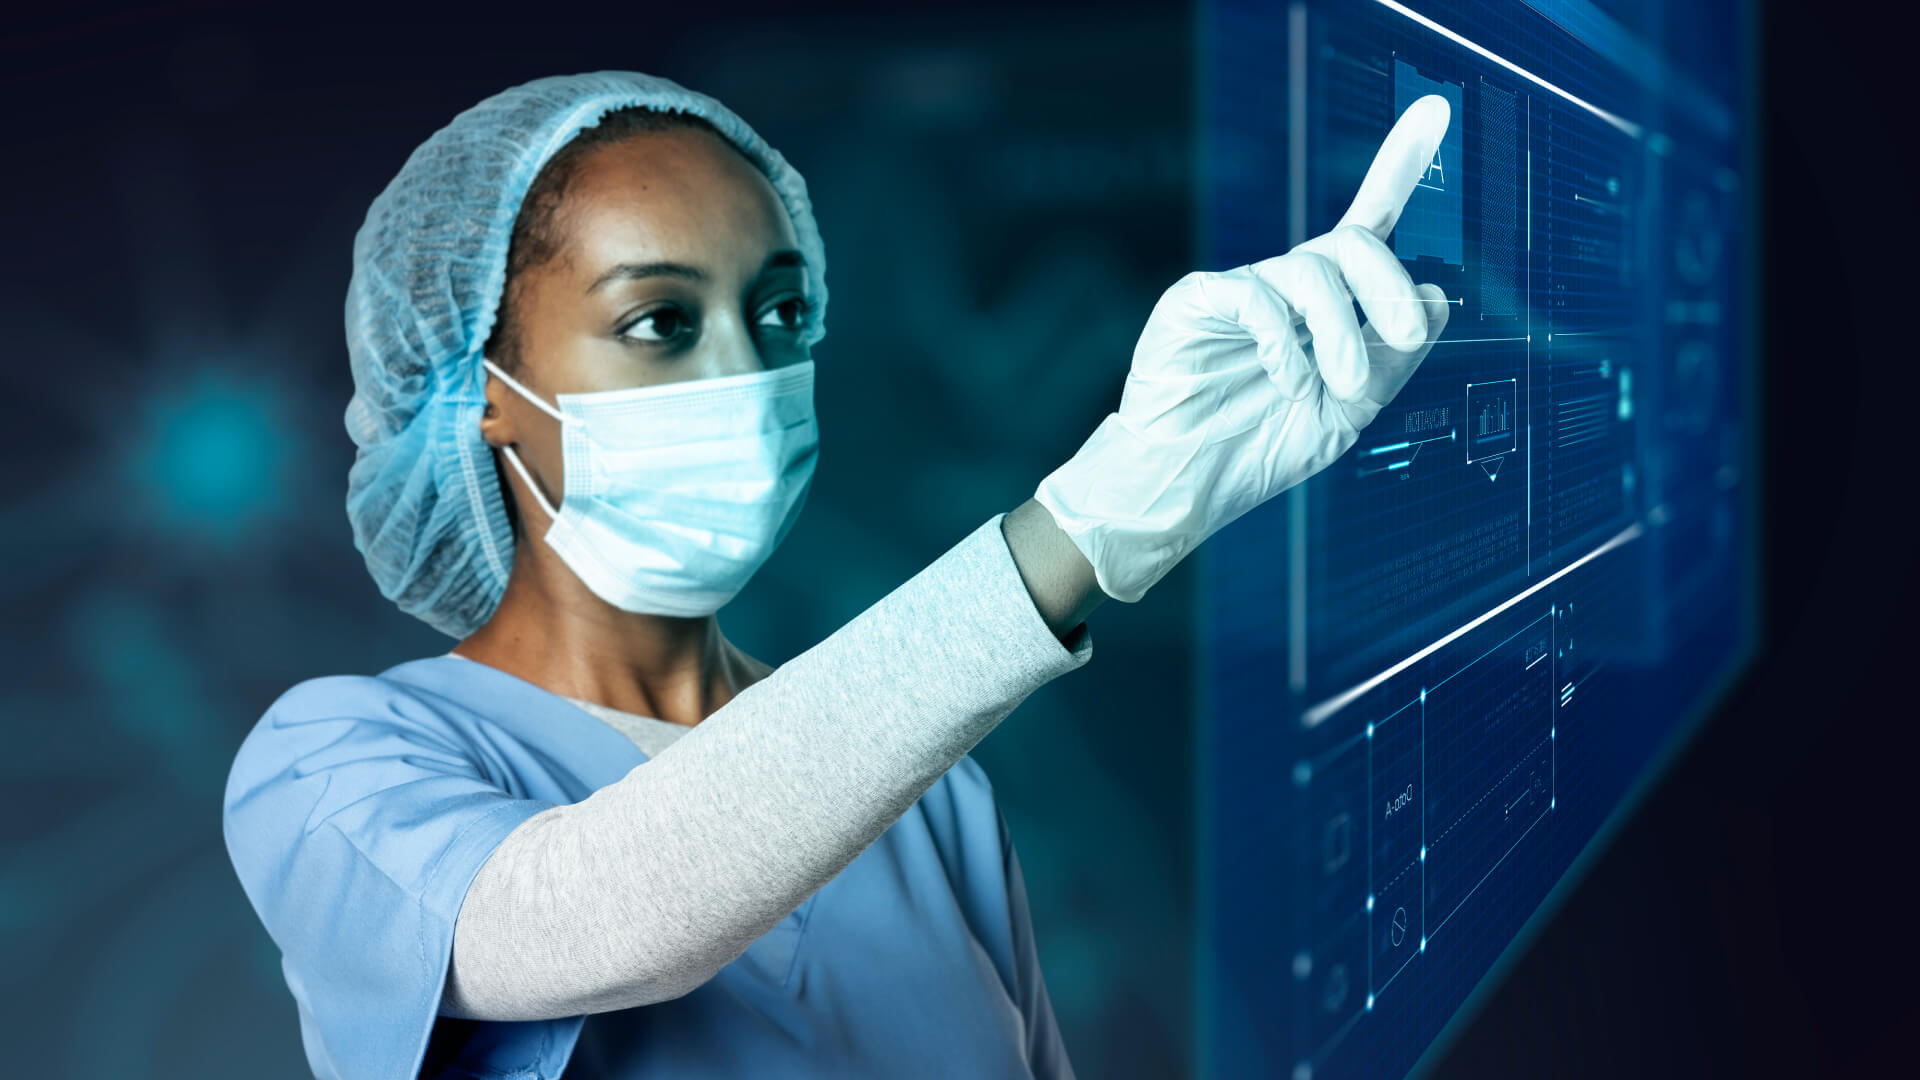 A medical professional in scrubs and protective gear interacting with a futuristic digital interface.